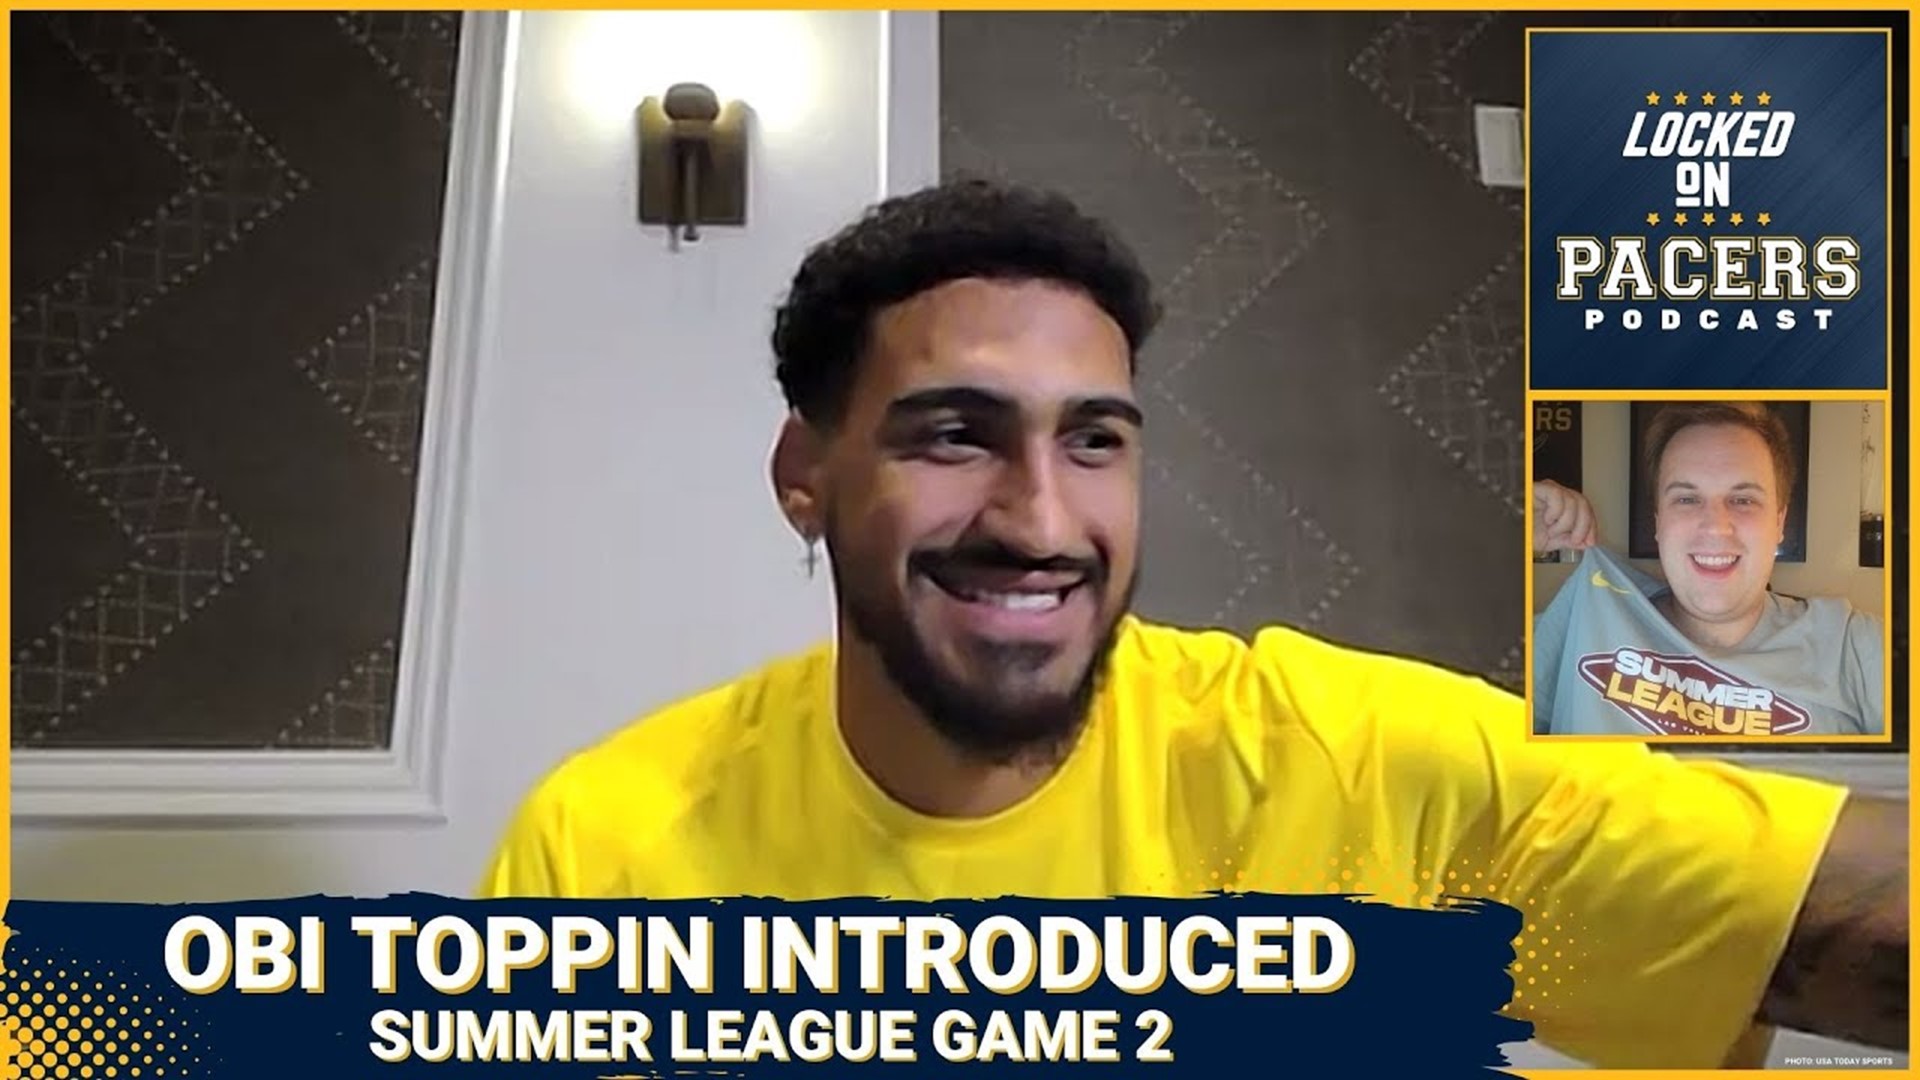 Obi Toppin introduced by Indiana Pacers. Summer League game 2 recap. NBA Midseason tournament